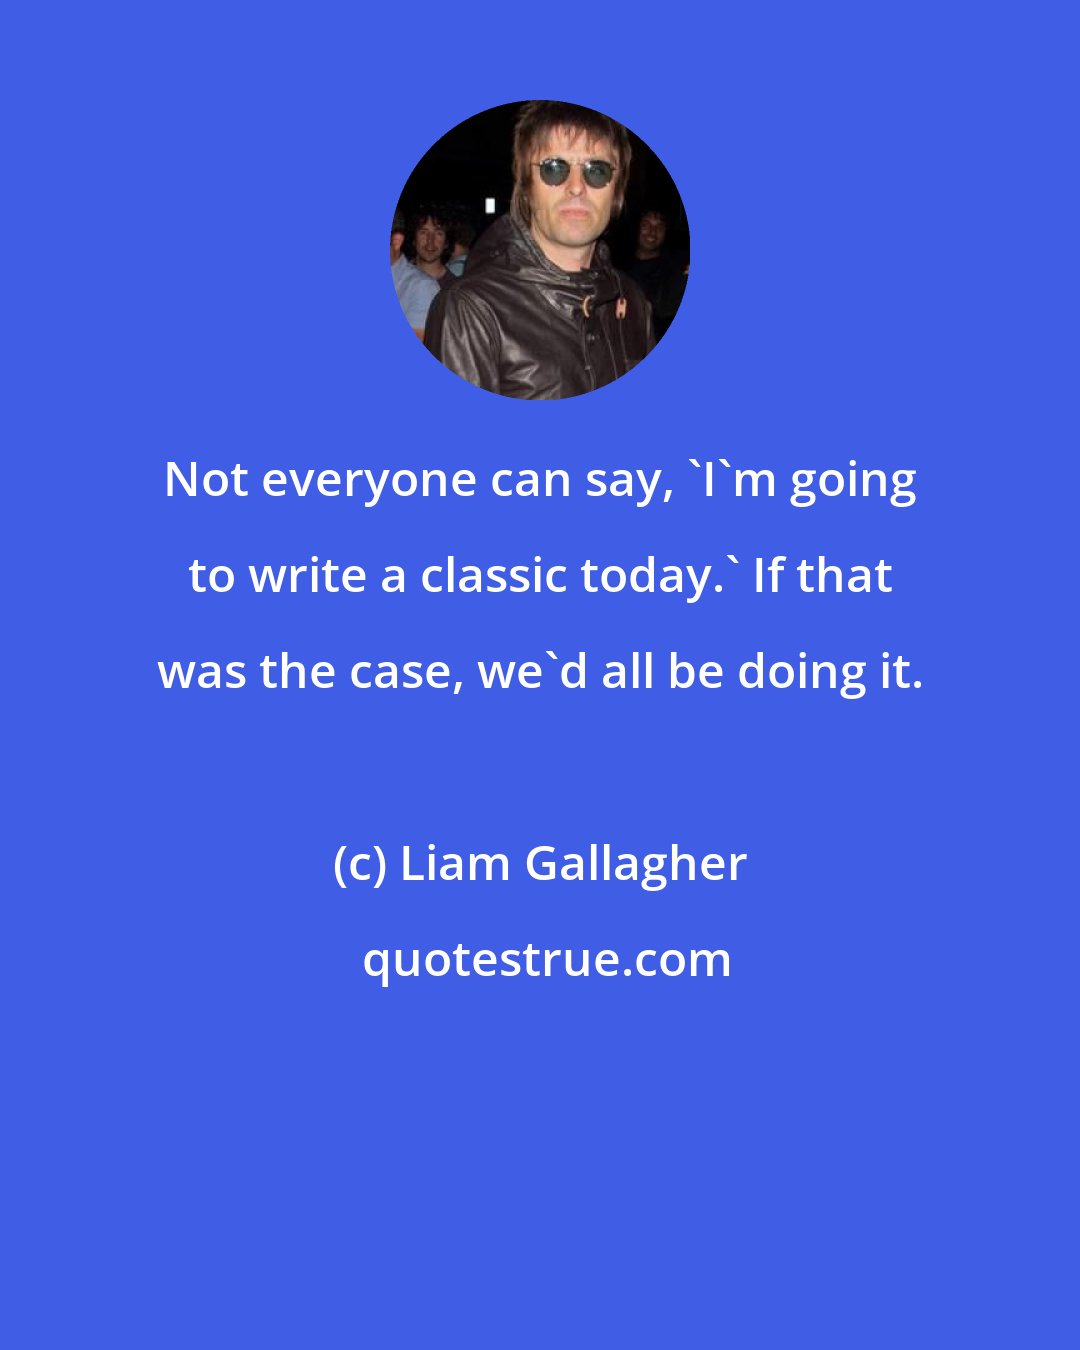 Liam Gallagher: Not everyone can say, 'I'm going to write a classic today.' If that was the case, we'd all be doing it.